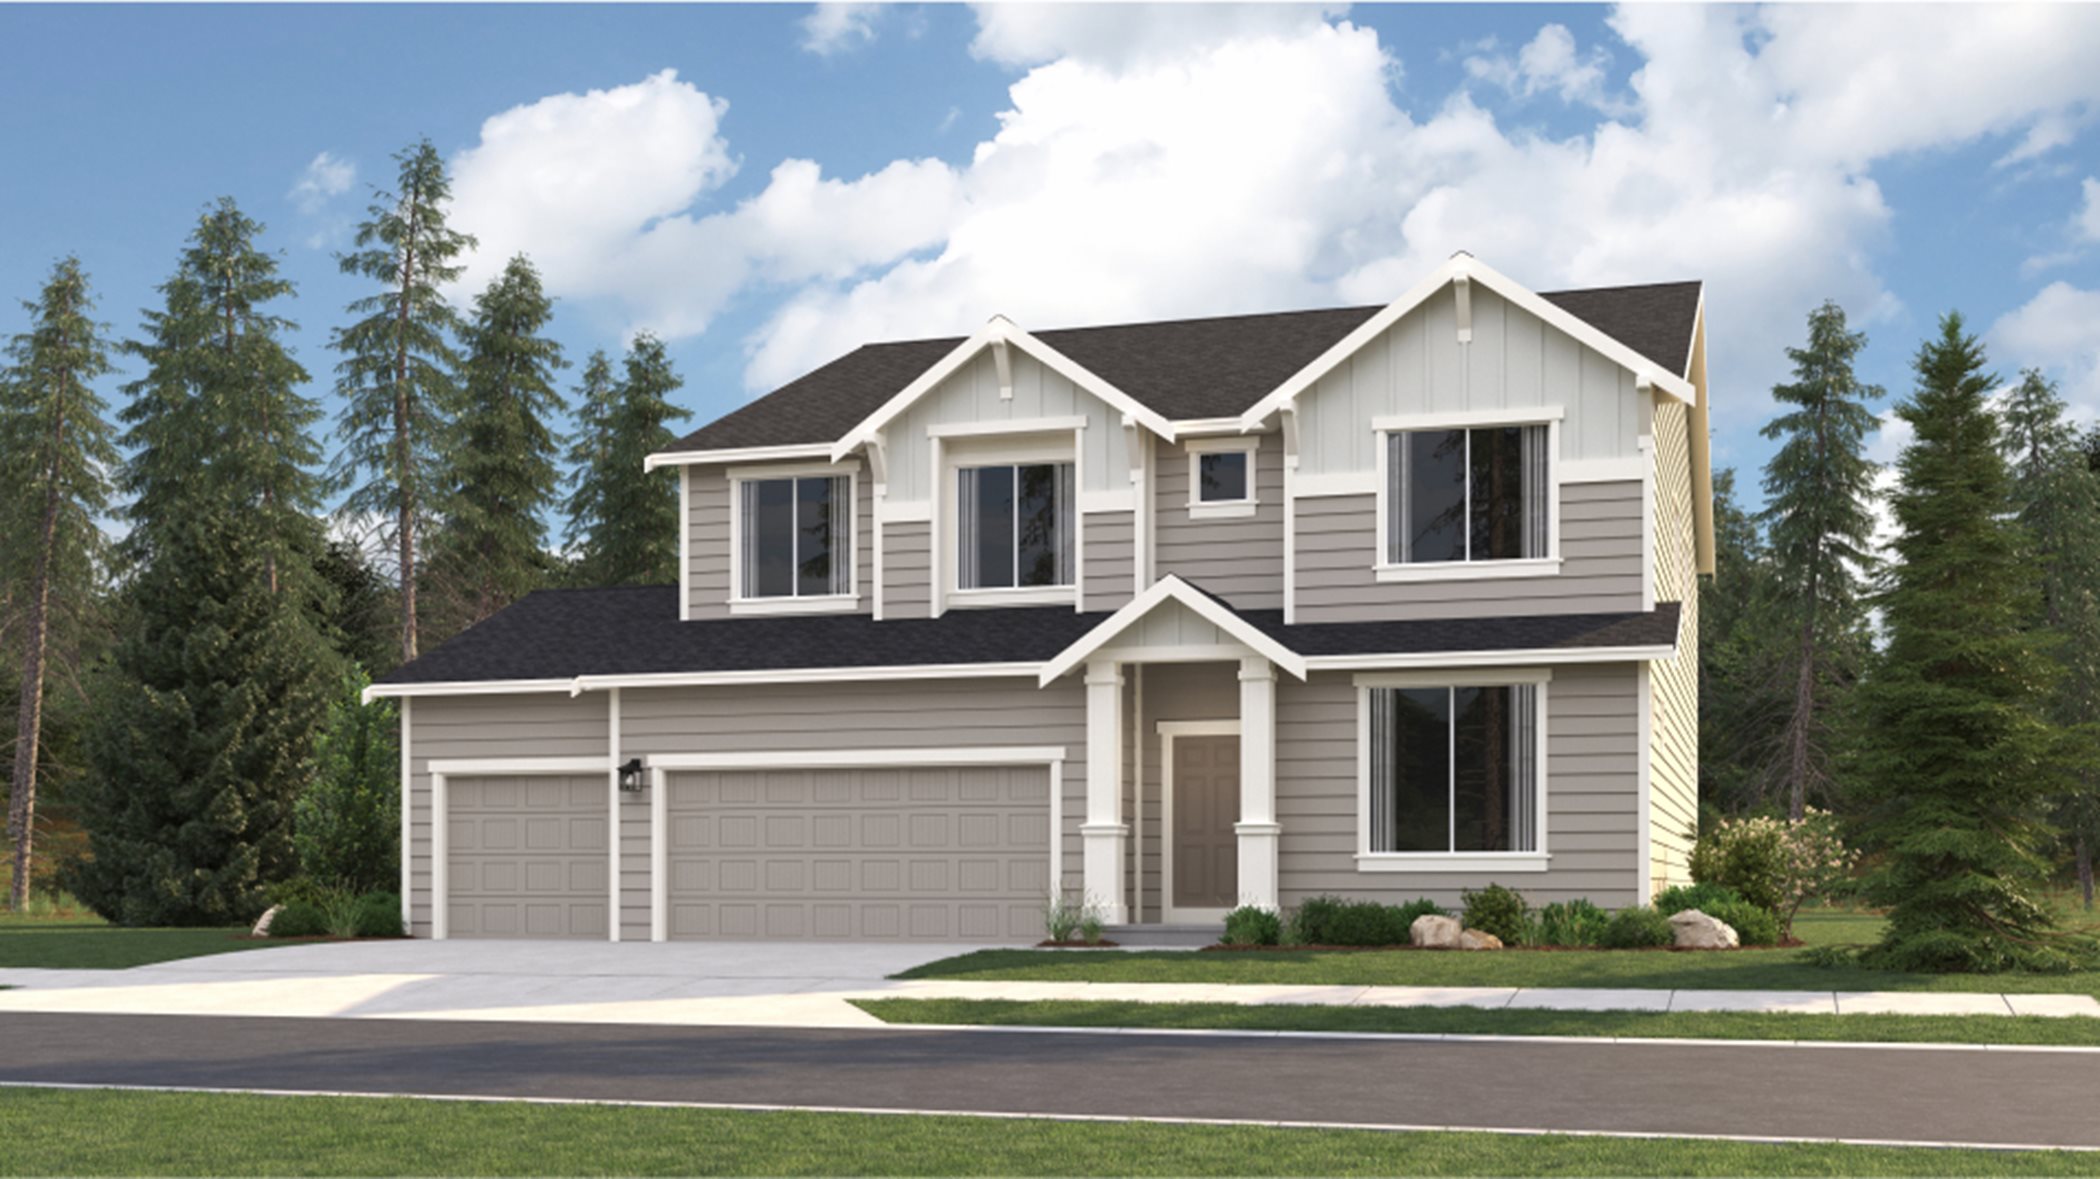 Elevation A home rendering image